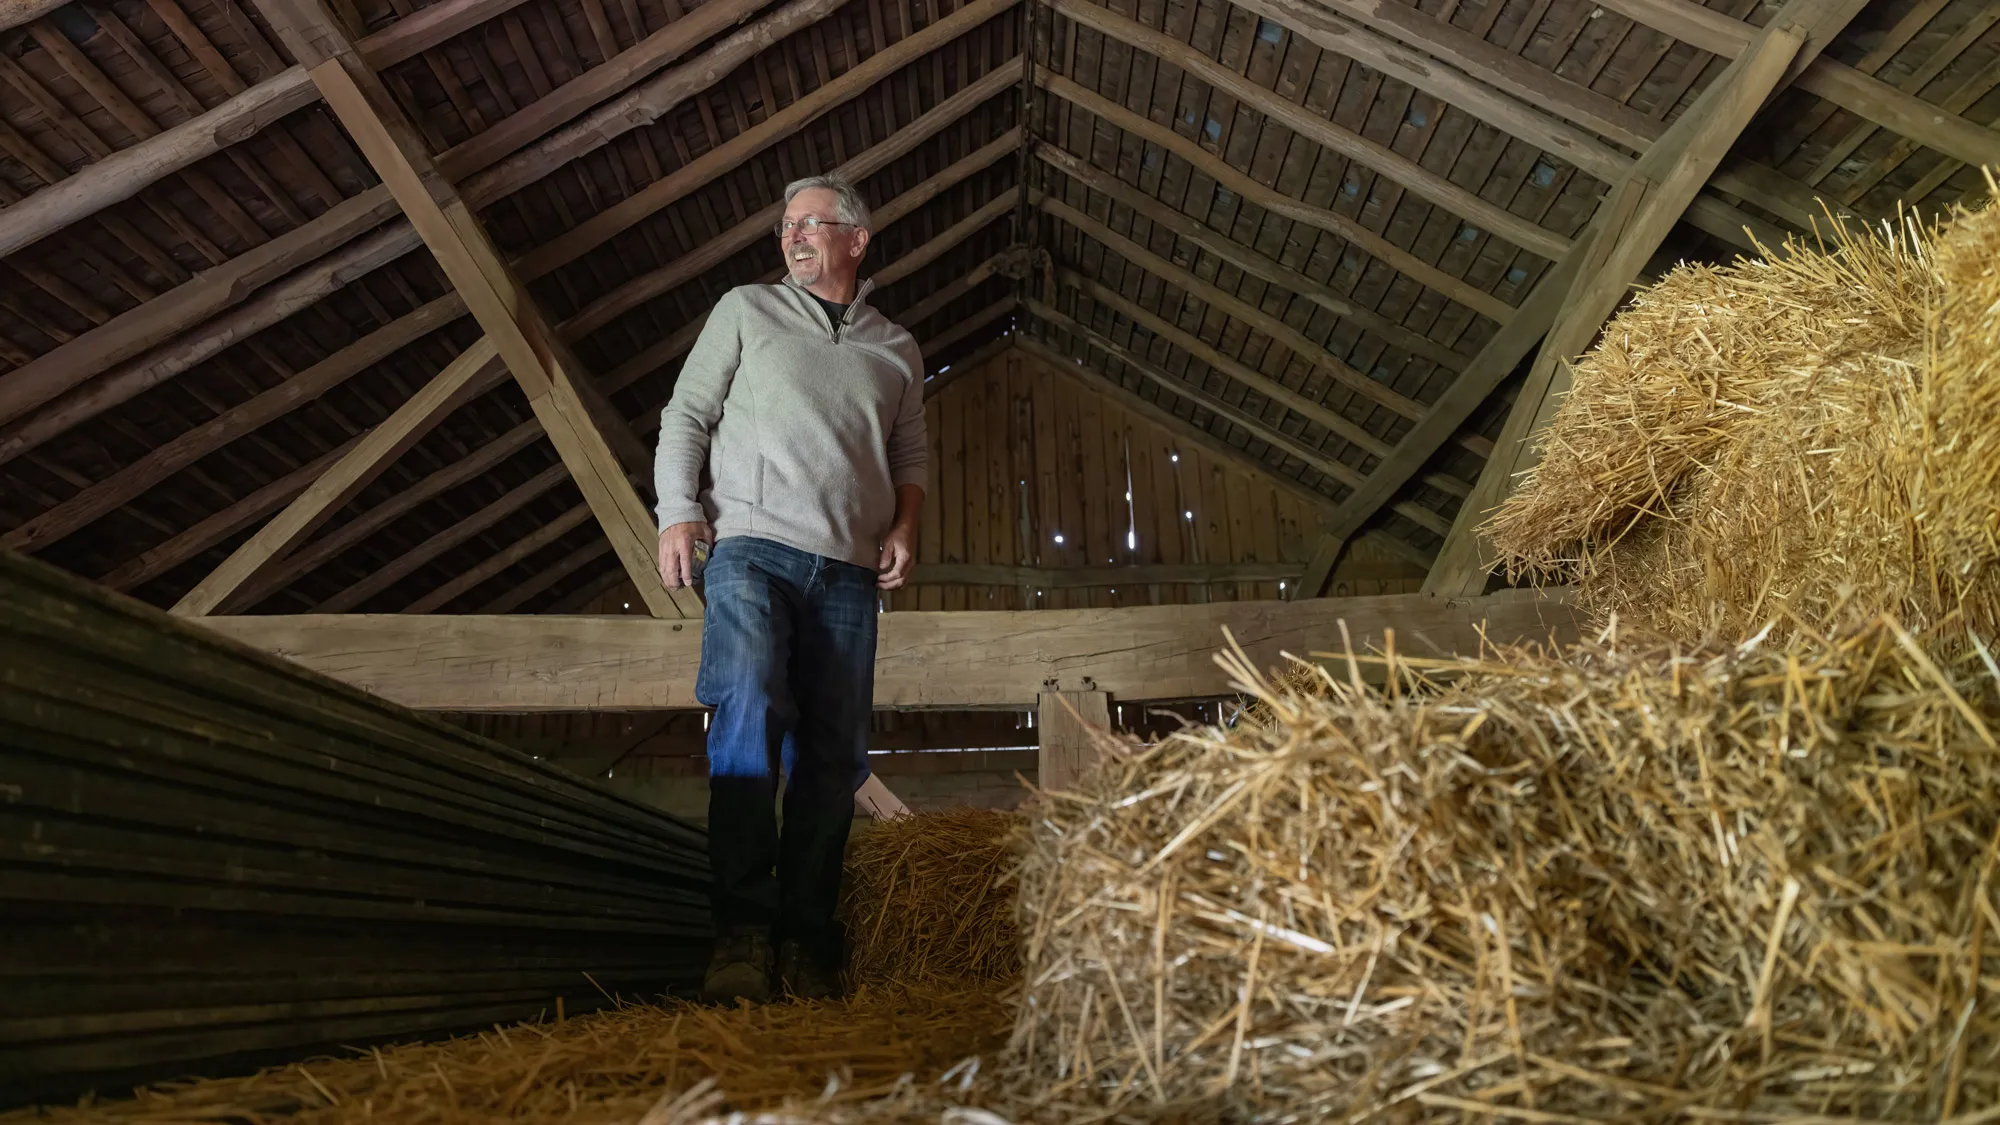 Doug Morgan surveys the loft inside an old barn he plans to dismantle, rebuild and refurbish, giving the old timber a new take on life.